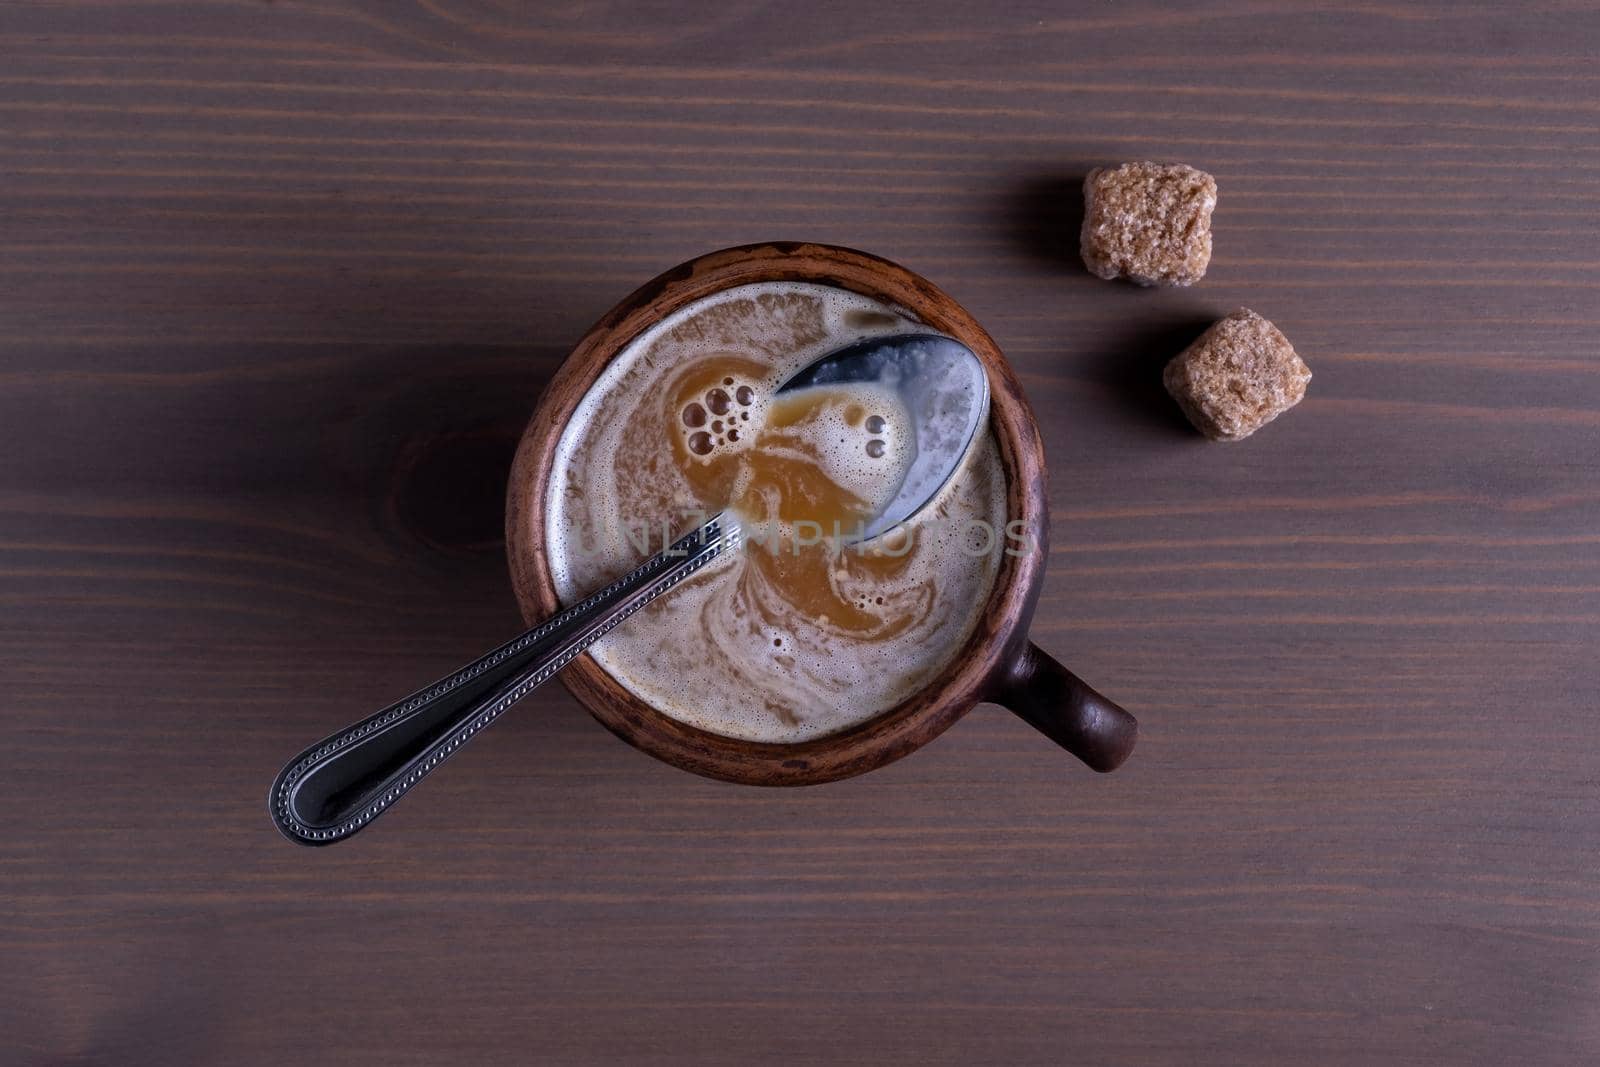 Close-up top view of hot coffee with milk in a fired earthenware mug with a small spoon and cane sugar pieces. Natural wood background.